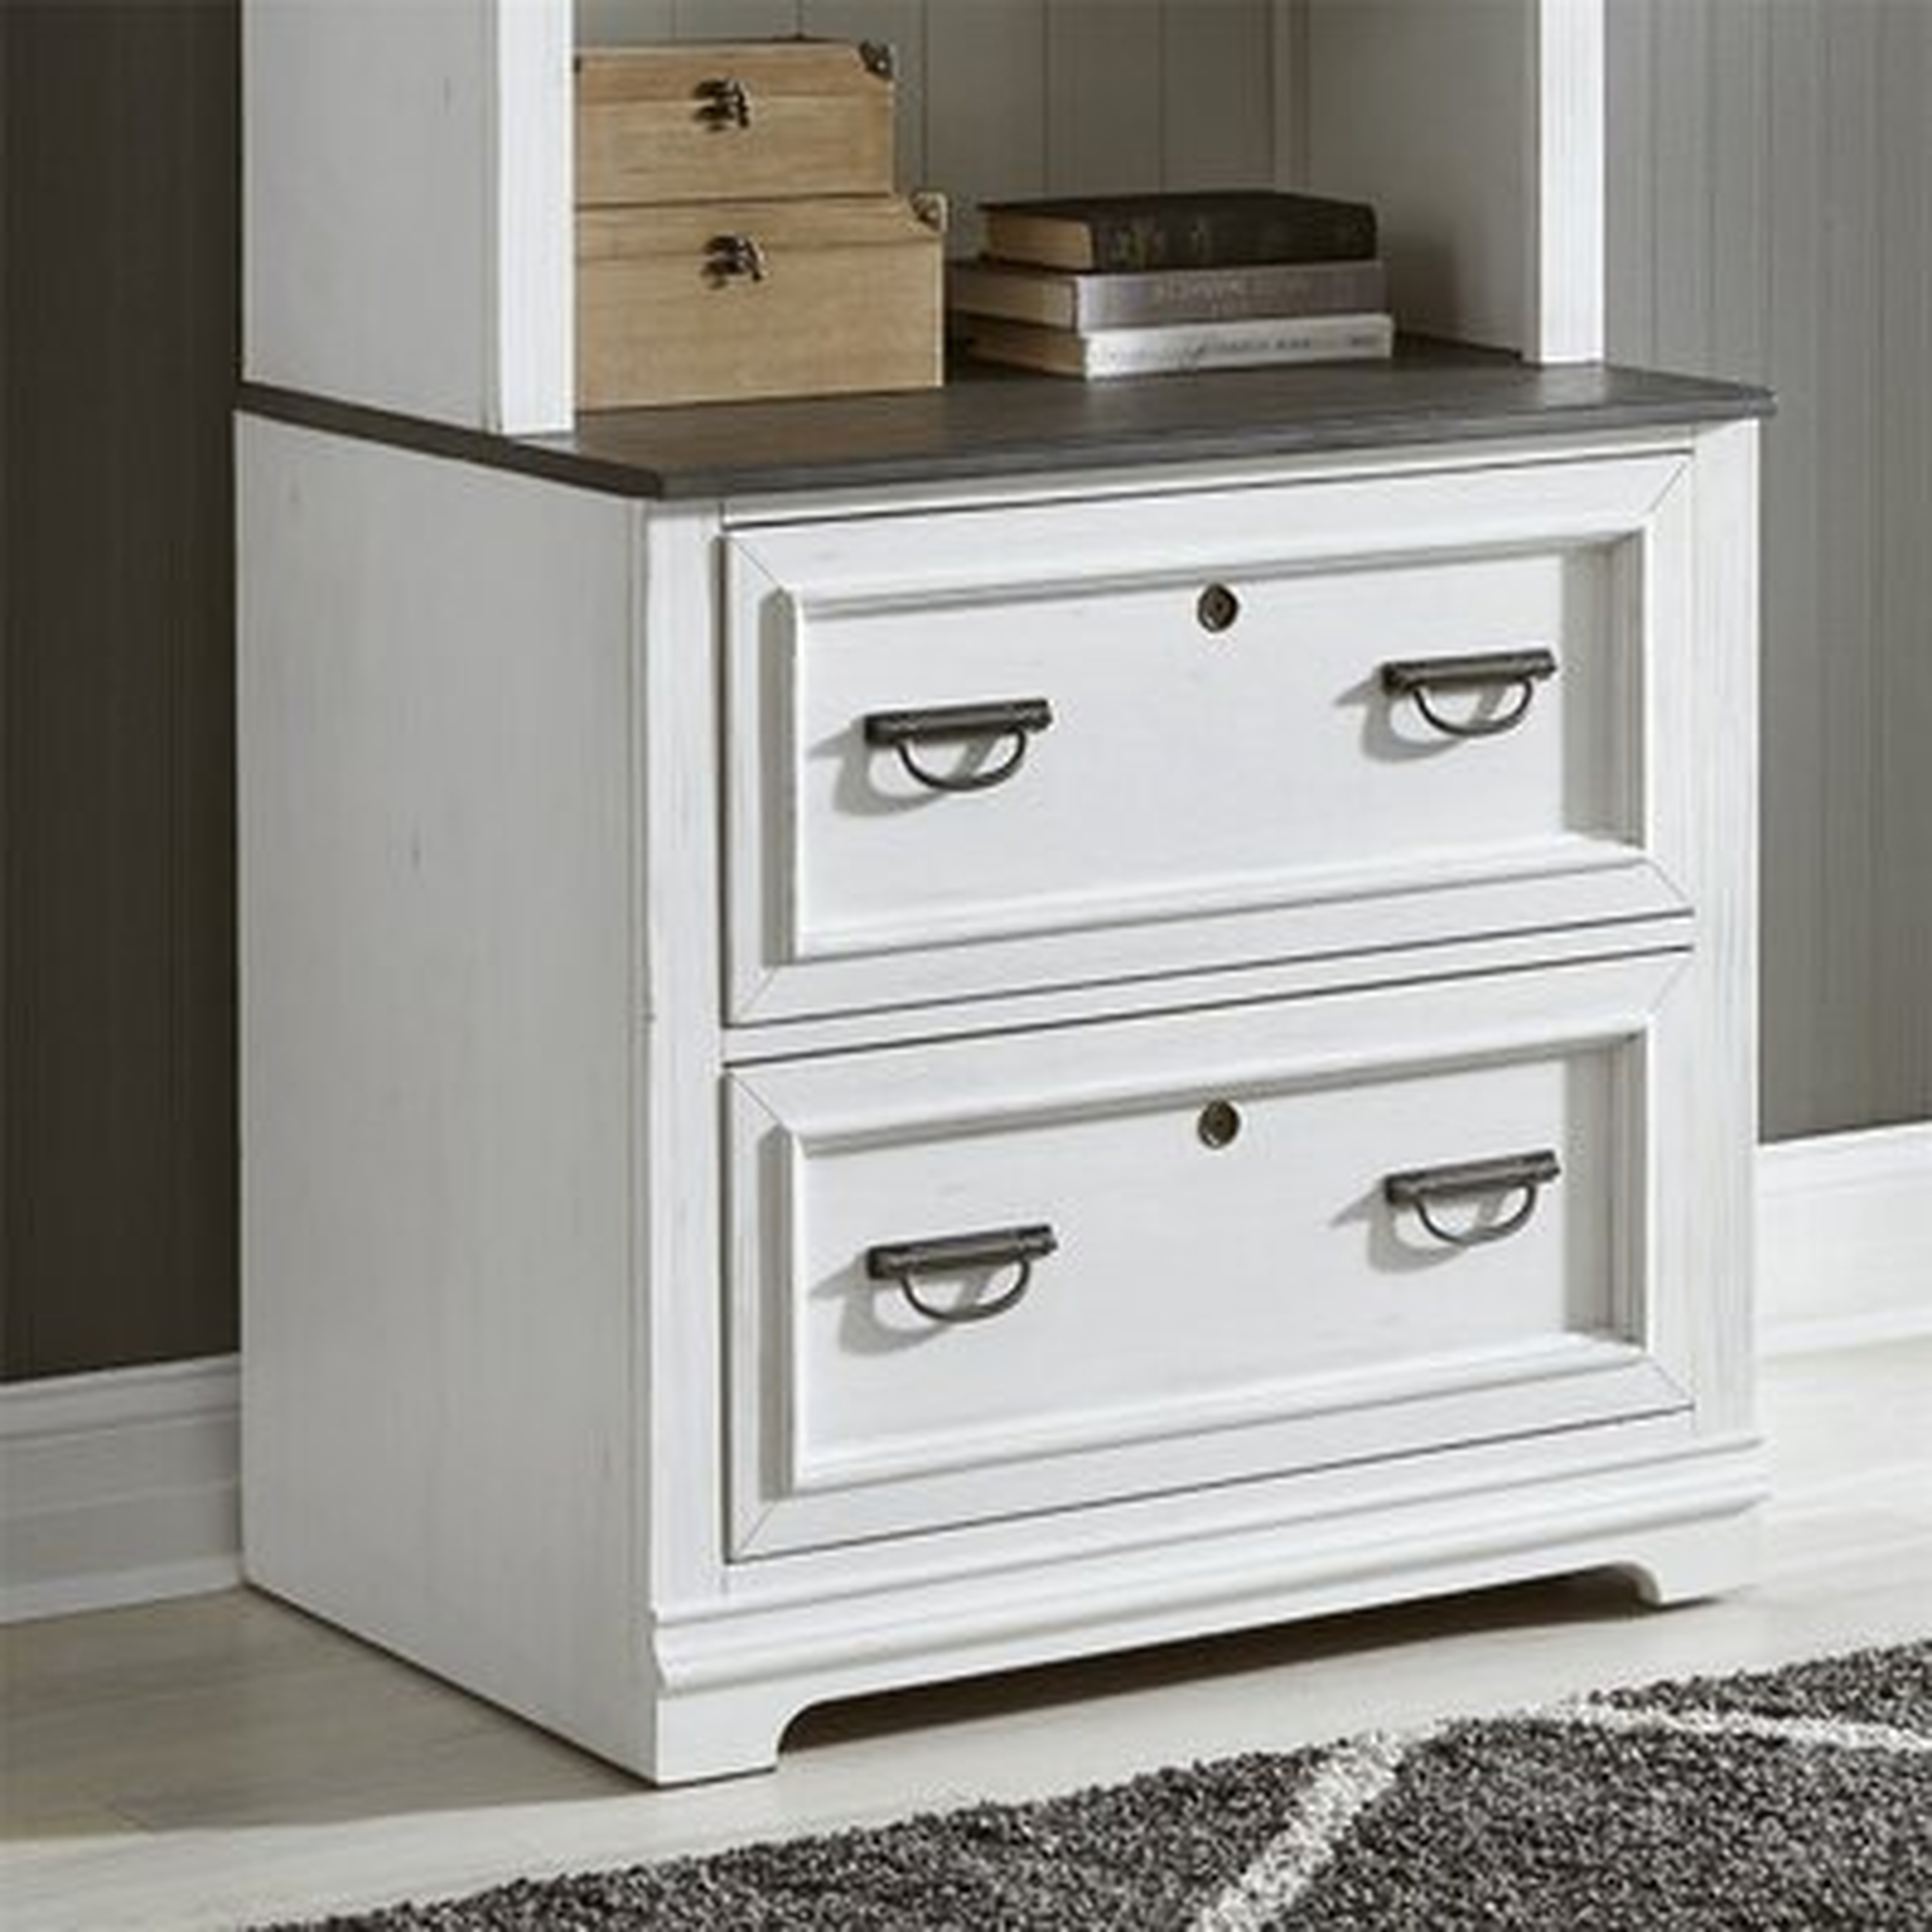 Charland 2-Drawer Lateral Filing Cabinet - Wayfair